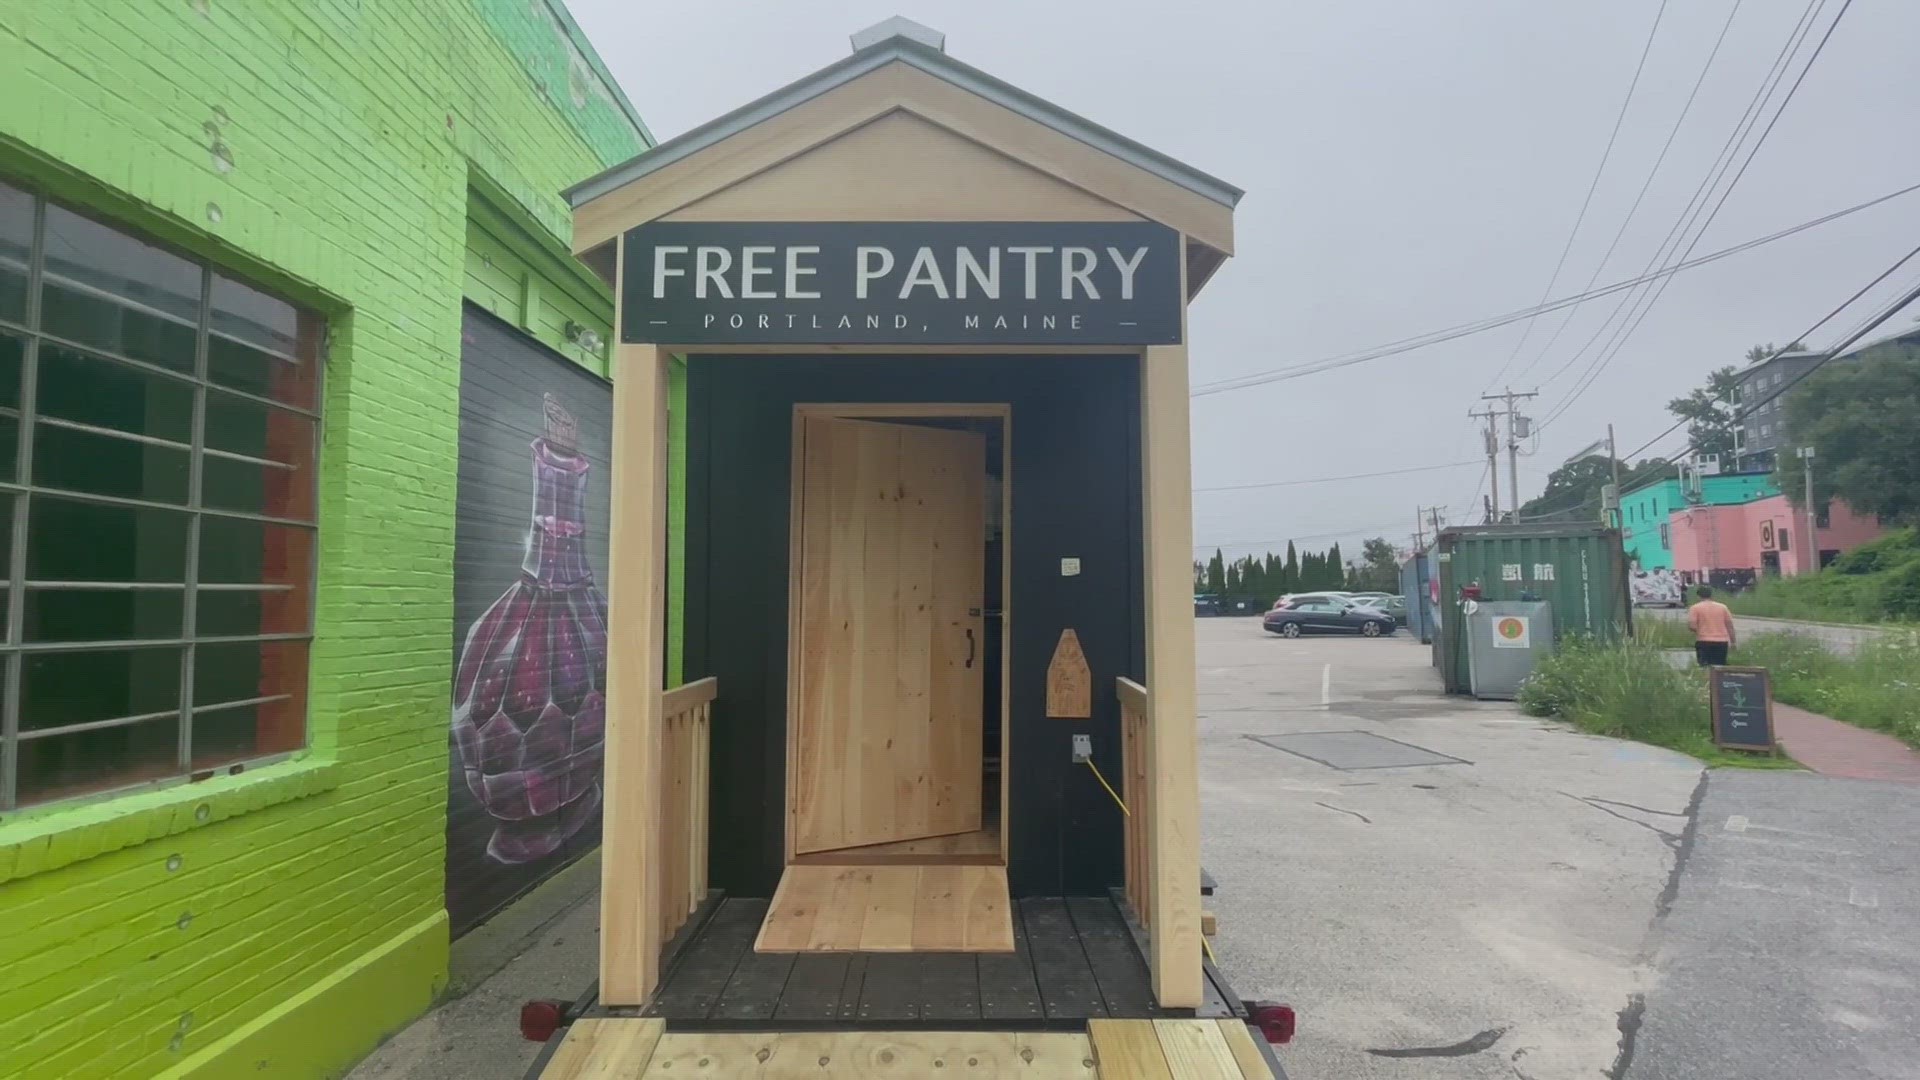 New England's first pantry on wheels gives access to everyone in the community, 24/7.